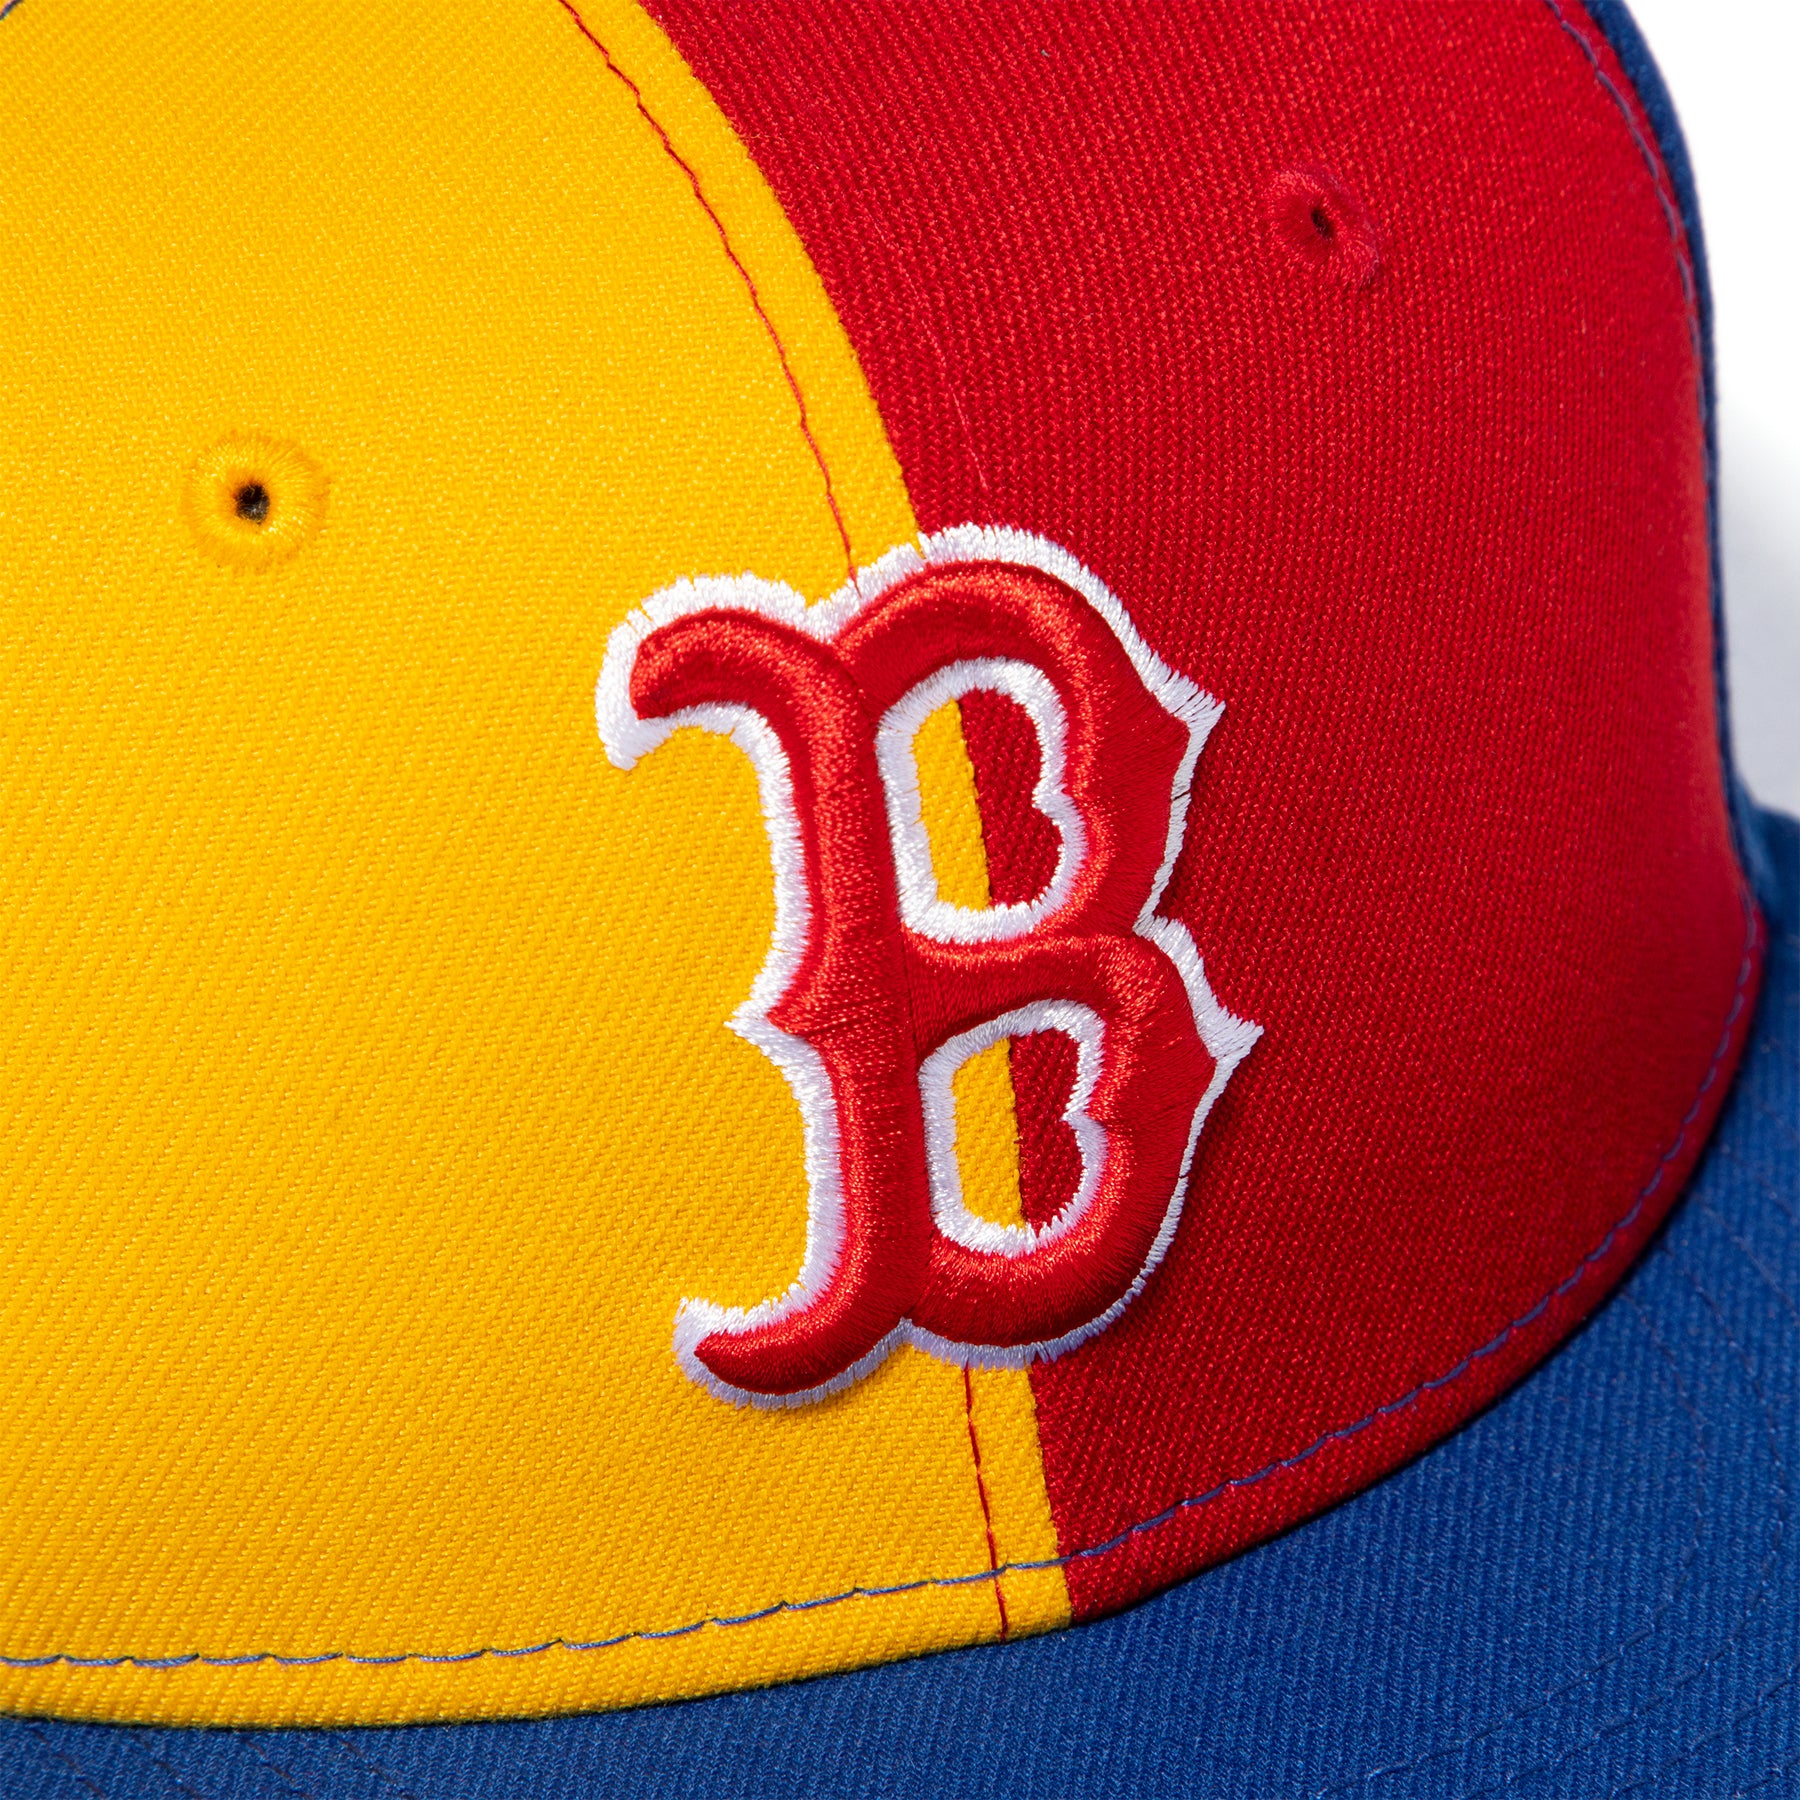 Concepts x New Era 59FIFTY Boston Red Sox 2004 World Series Fitted Hat (Yellow) 7 1/2